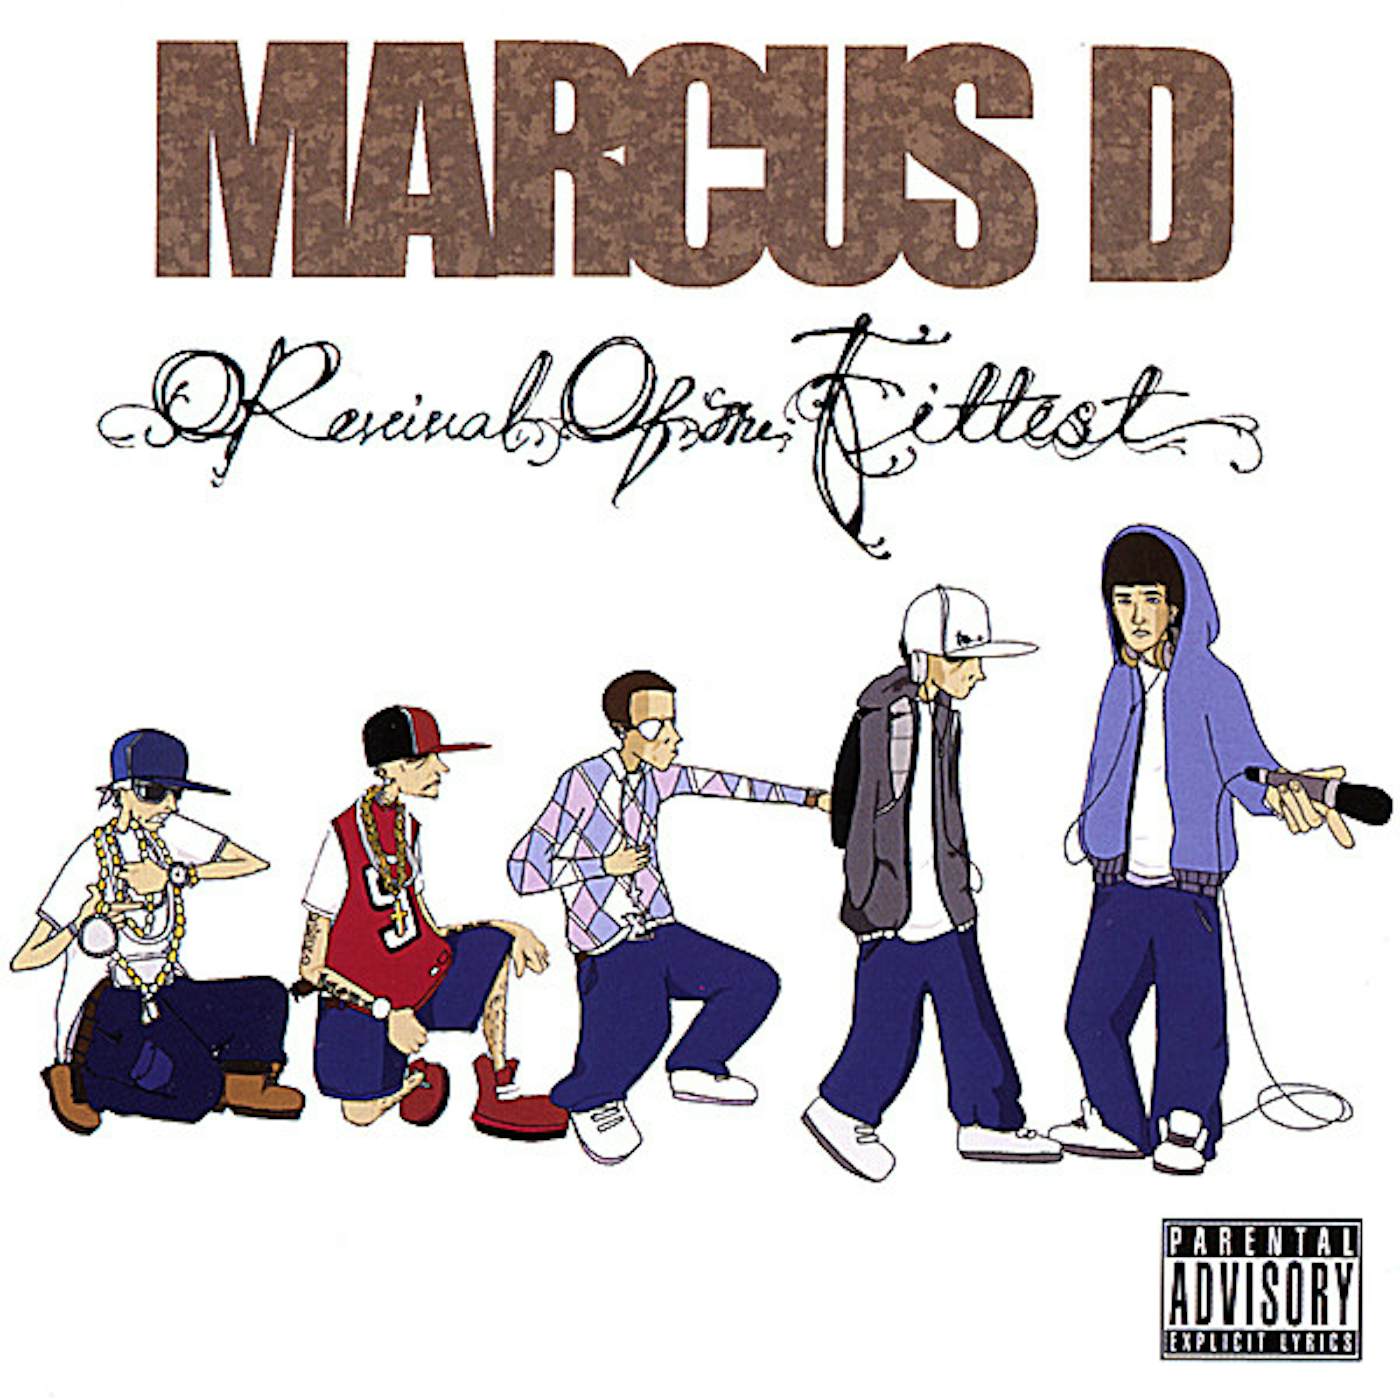 Marcus D REVIVAL OF THE FITTEST CD